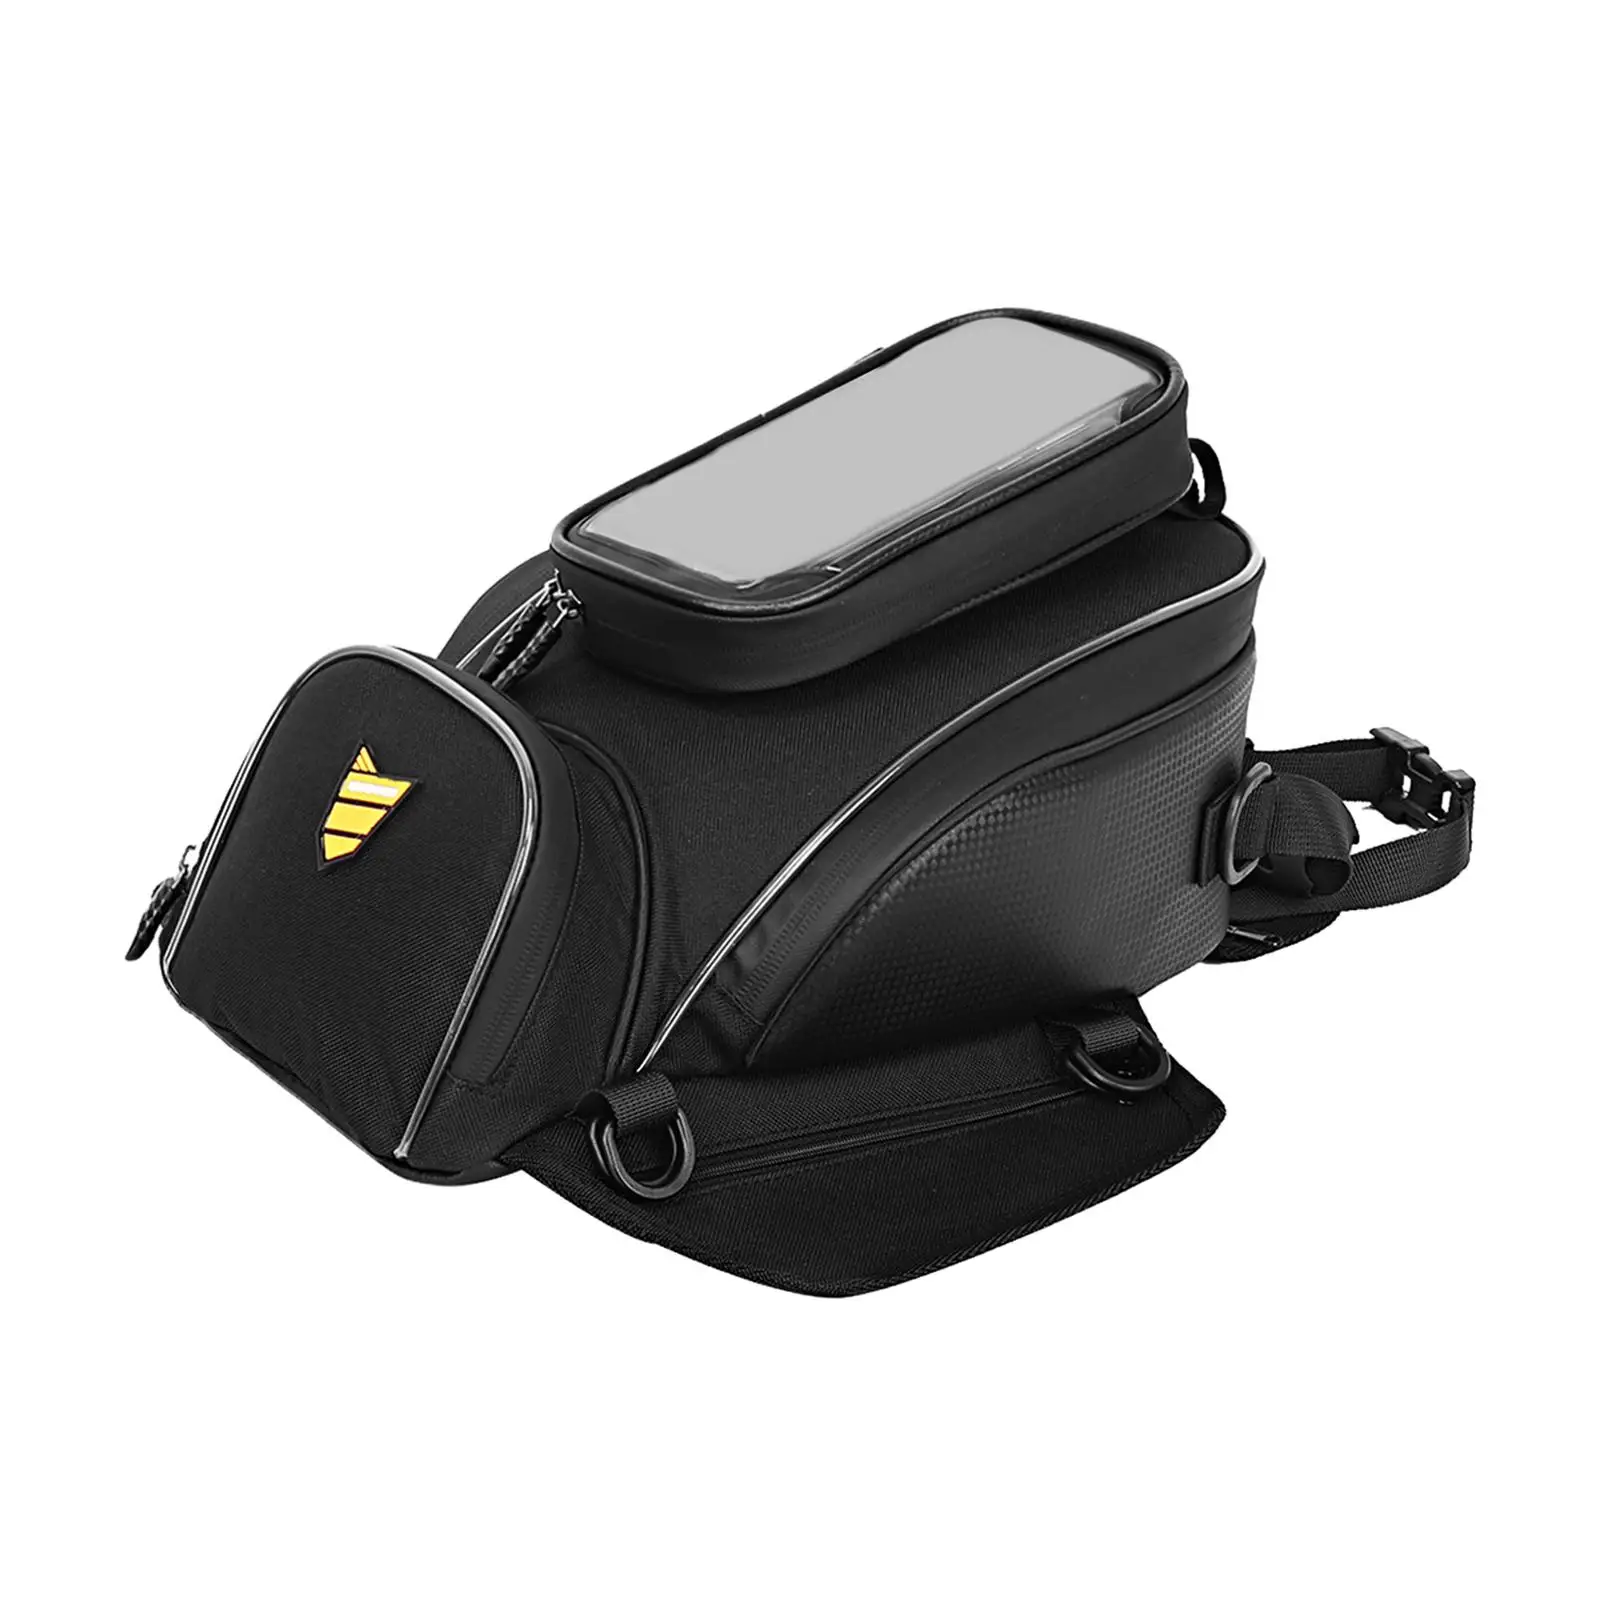 Motorbike Gas Oil Tank Bag Water Resistant for Outdoor Sports Riding Durable